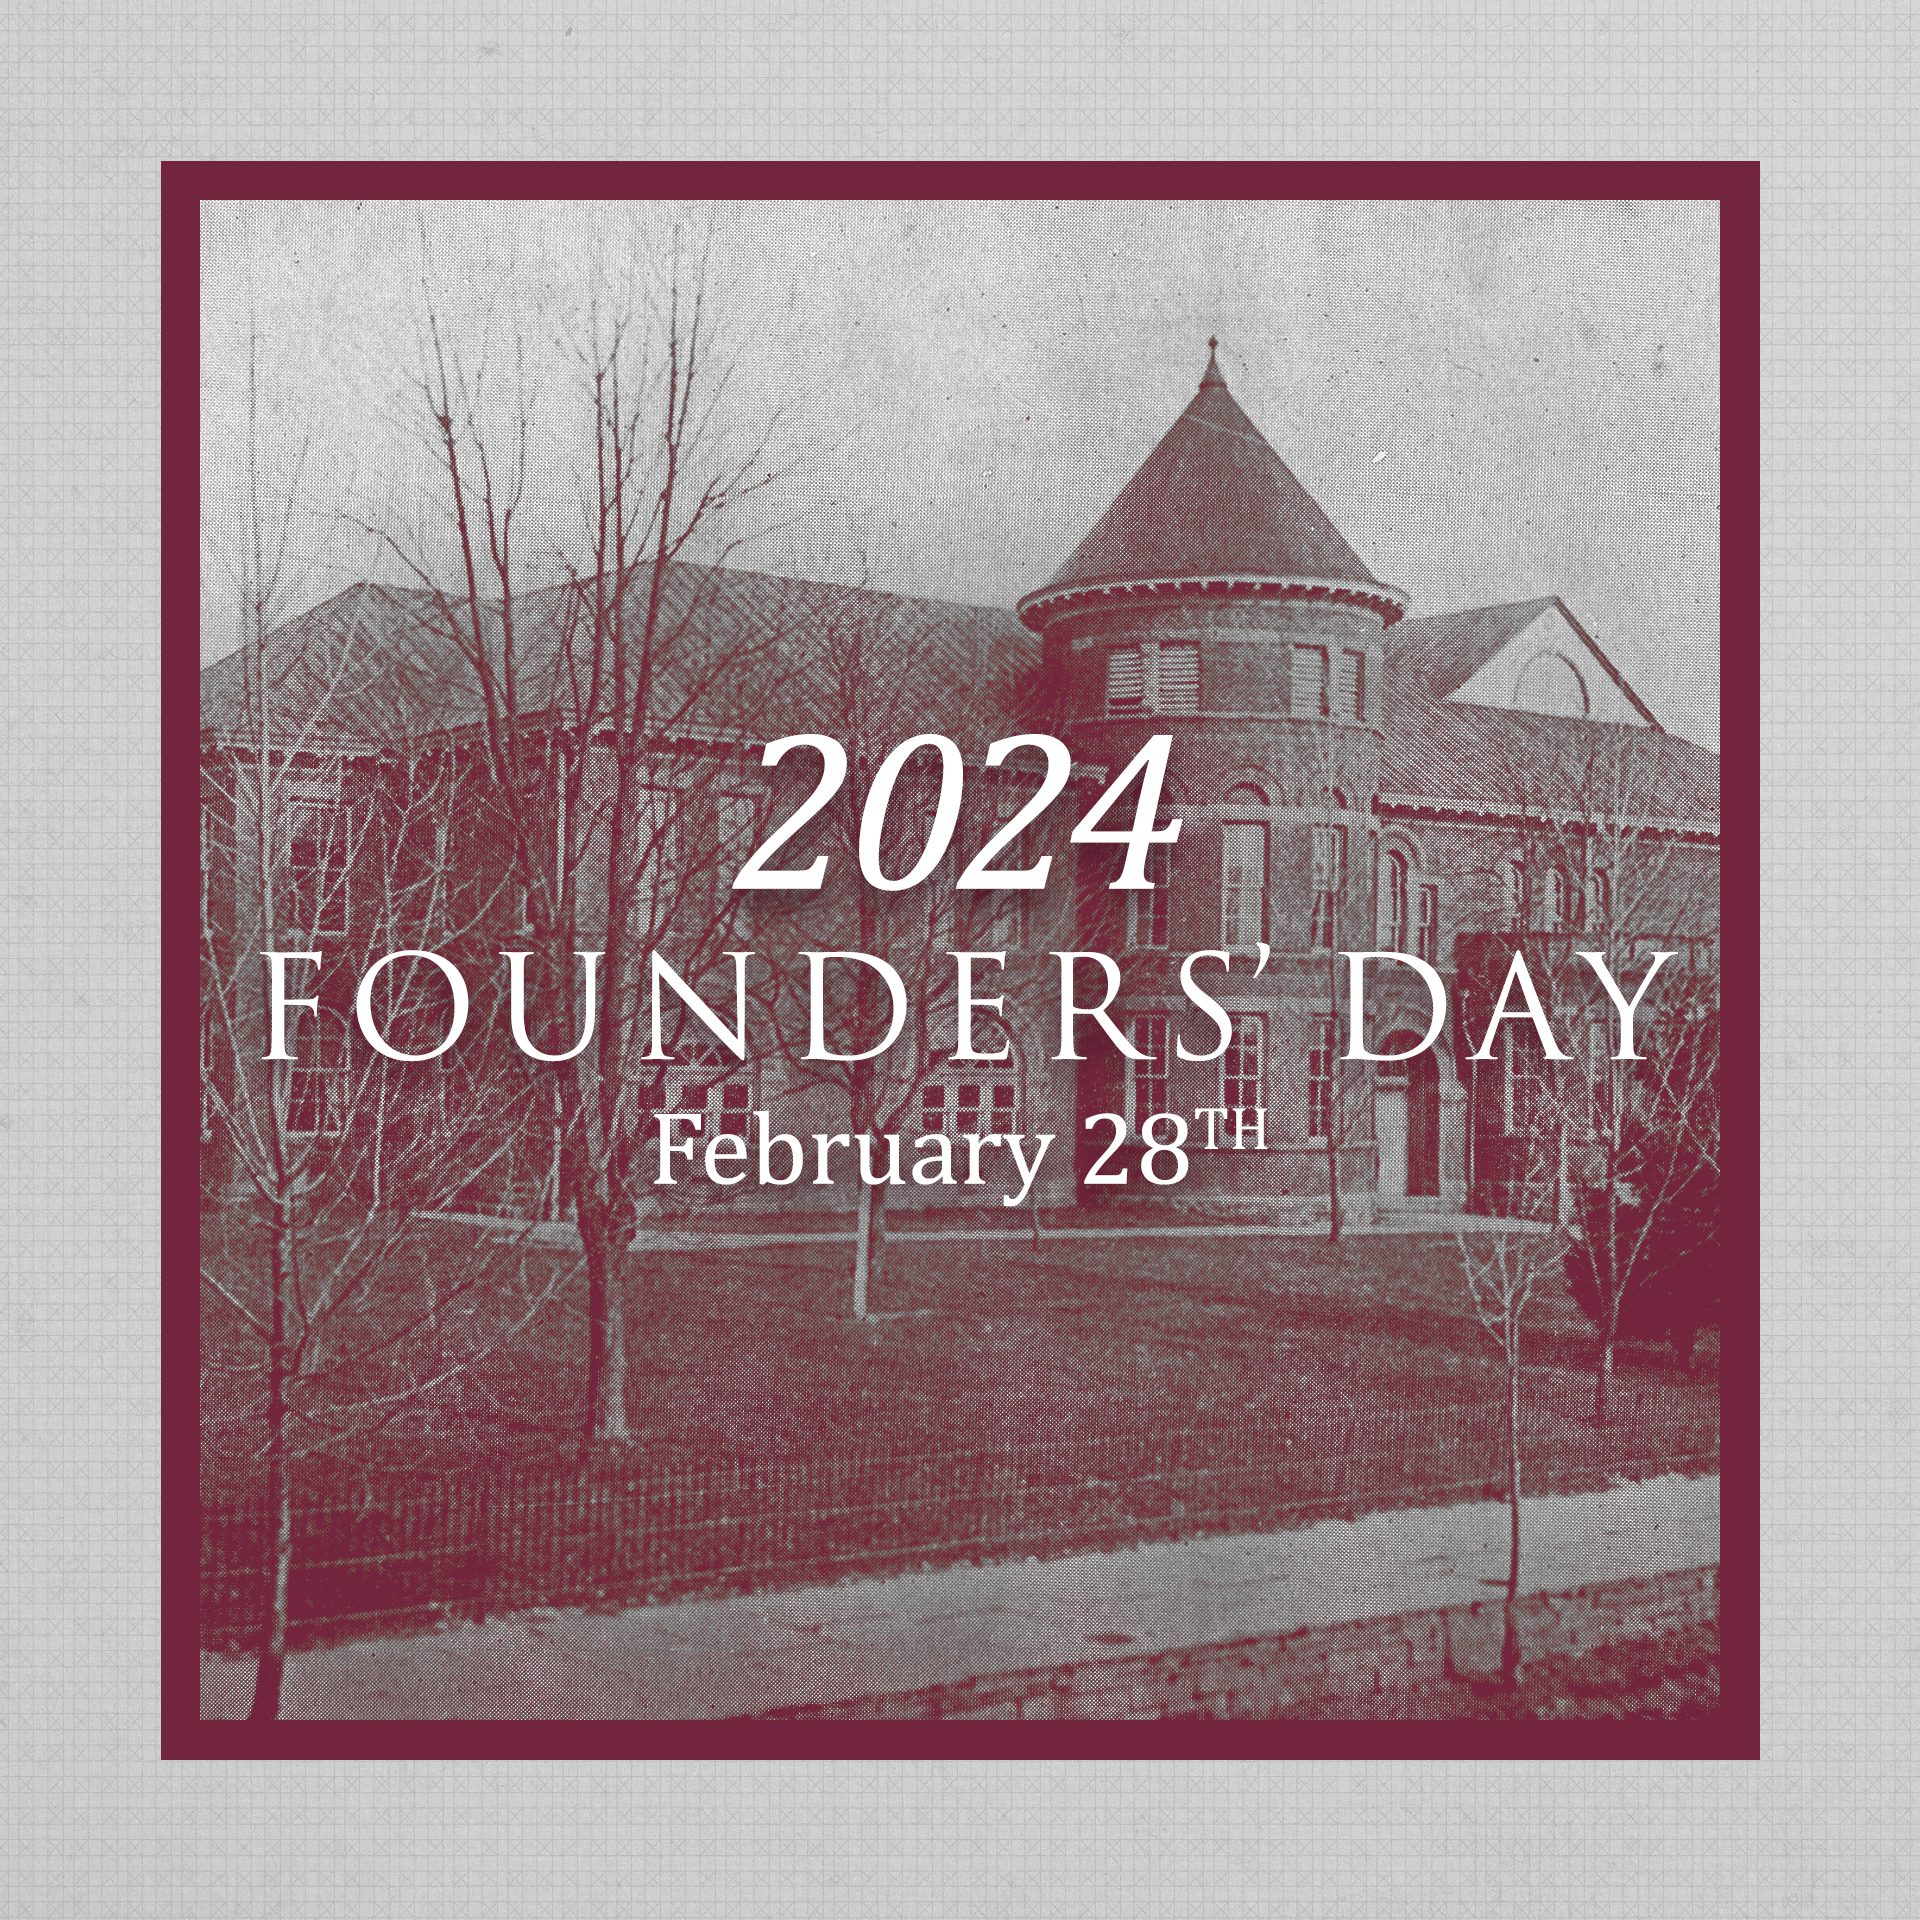 Join us for Concord University's Founders Day Celebration on February 28, 2024